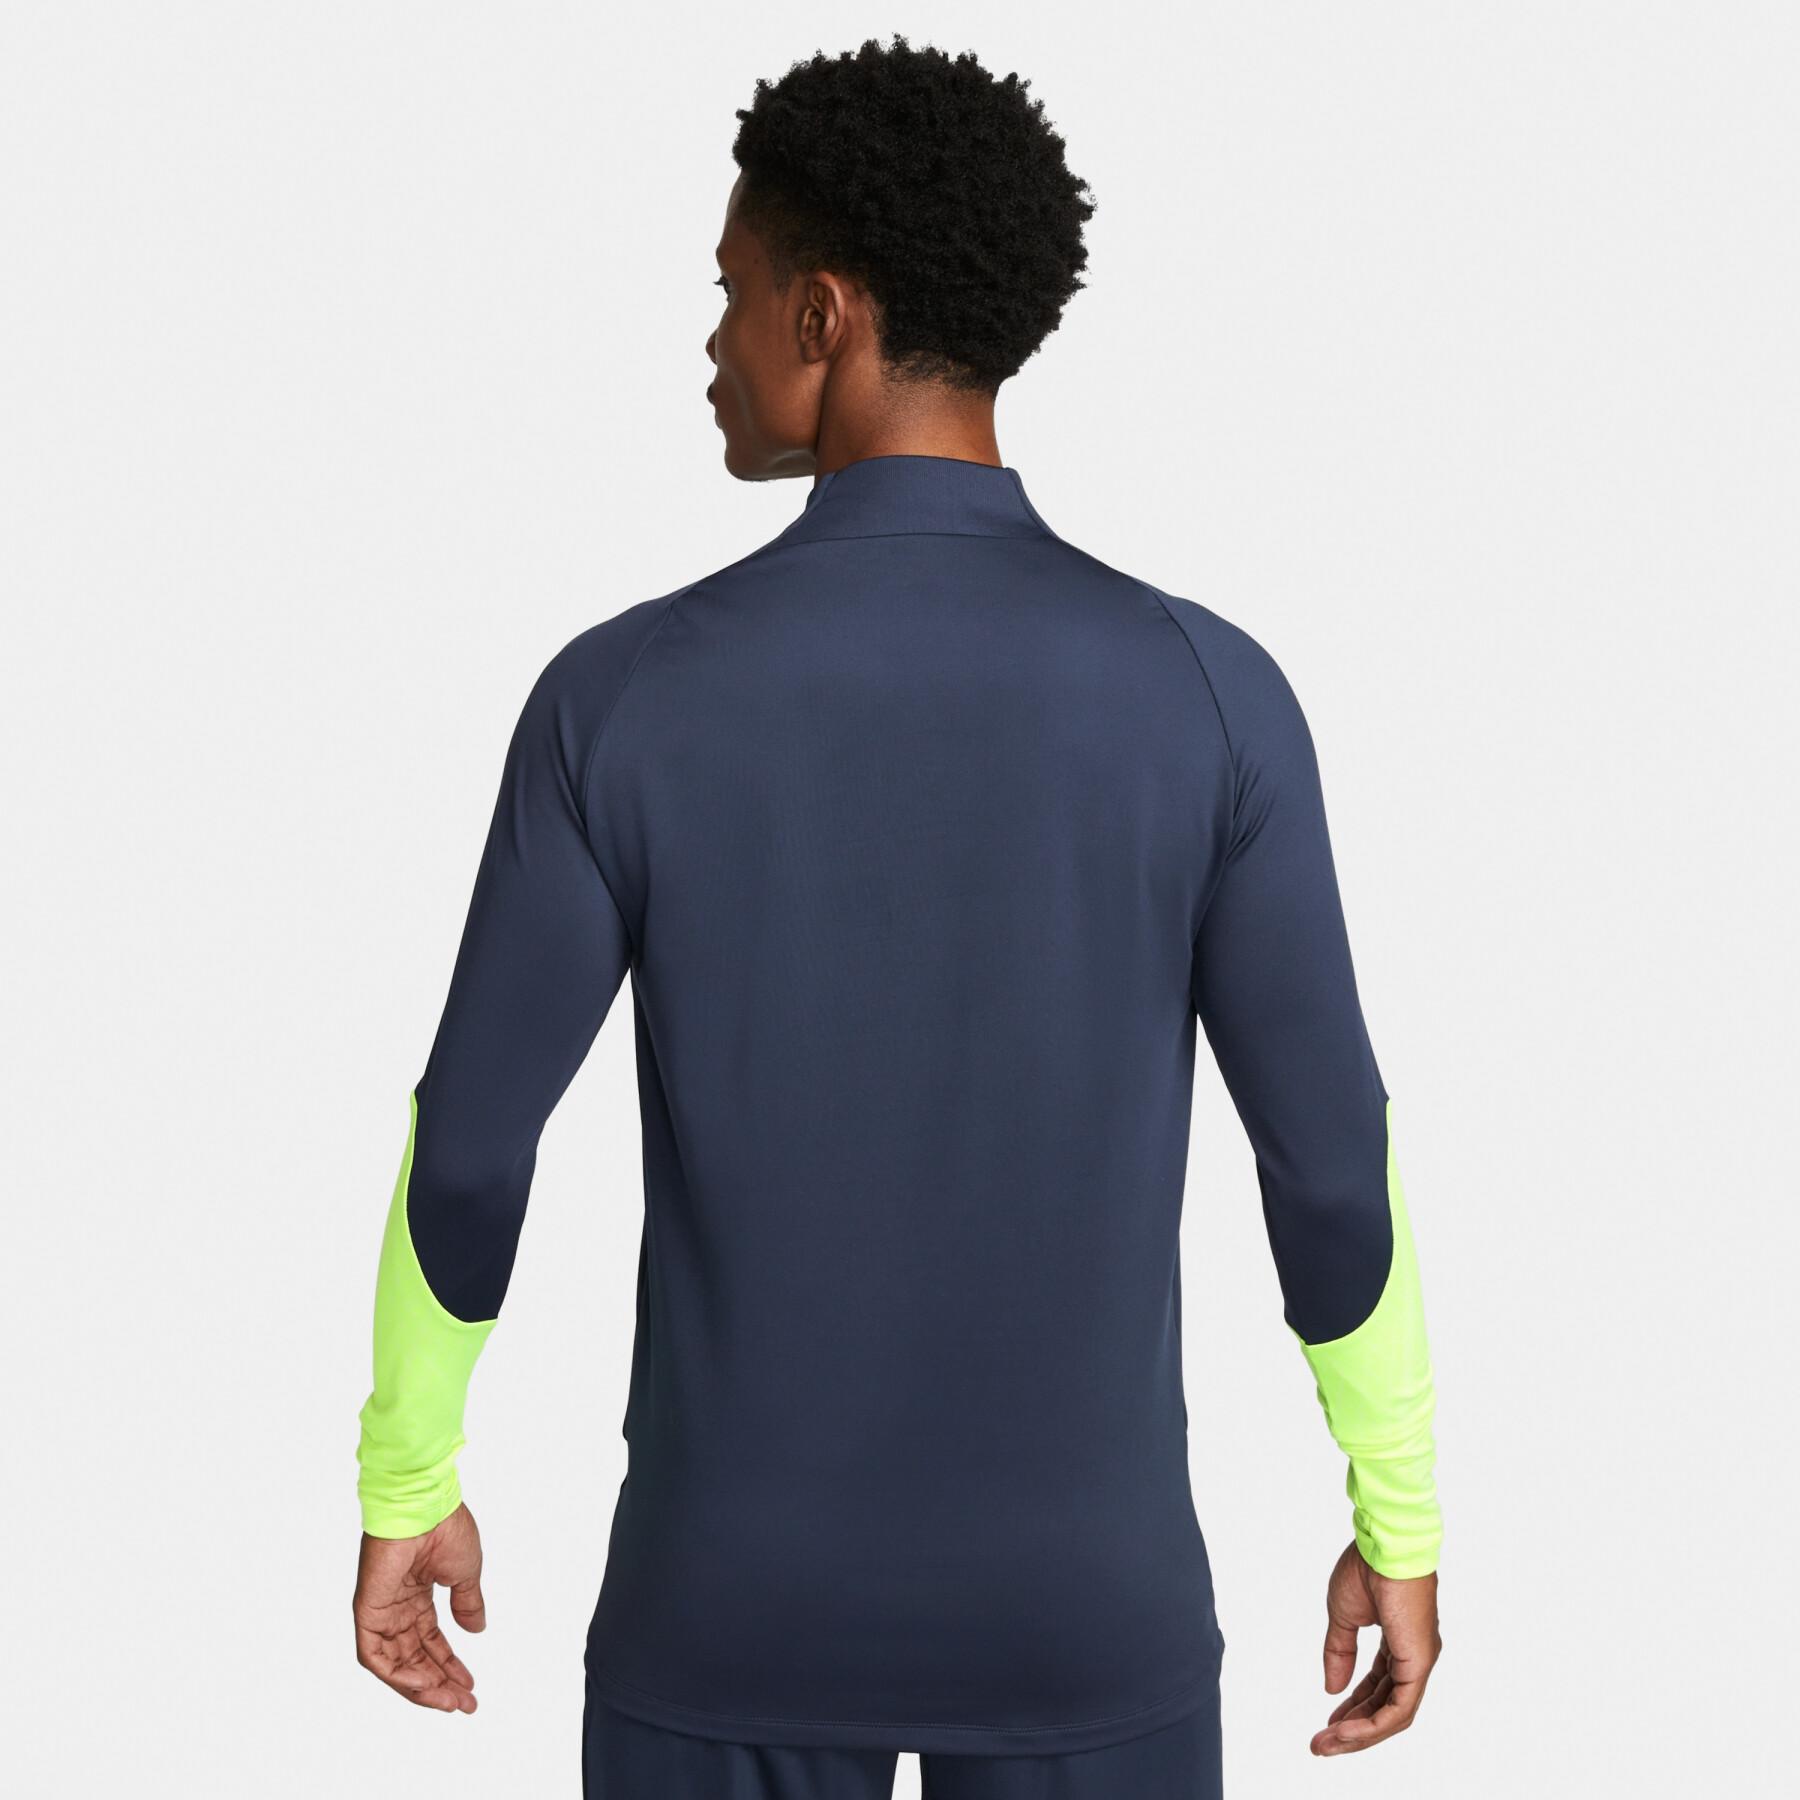 Maillot manches longues Nike Dri-FIT Strike